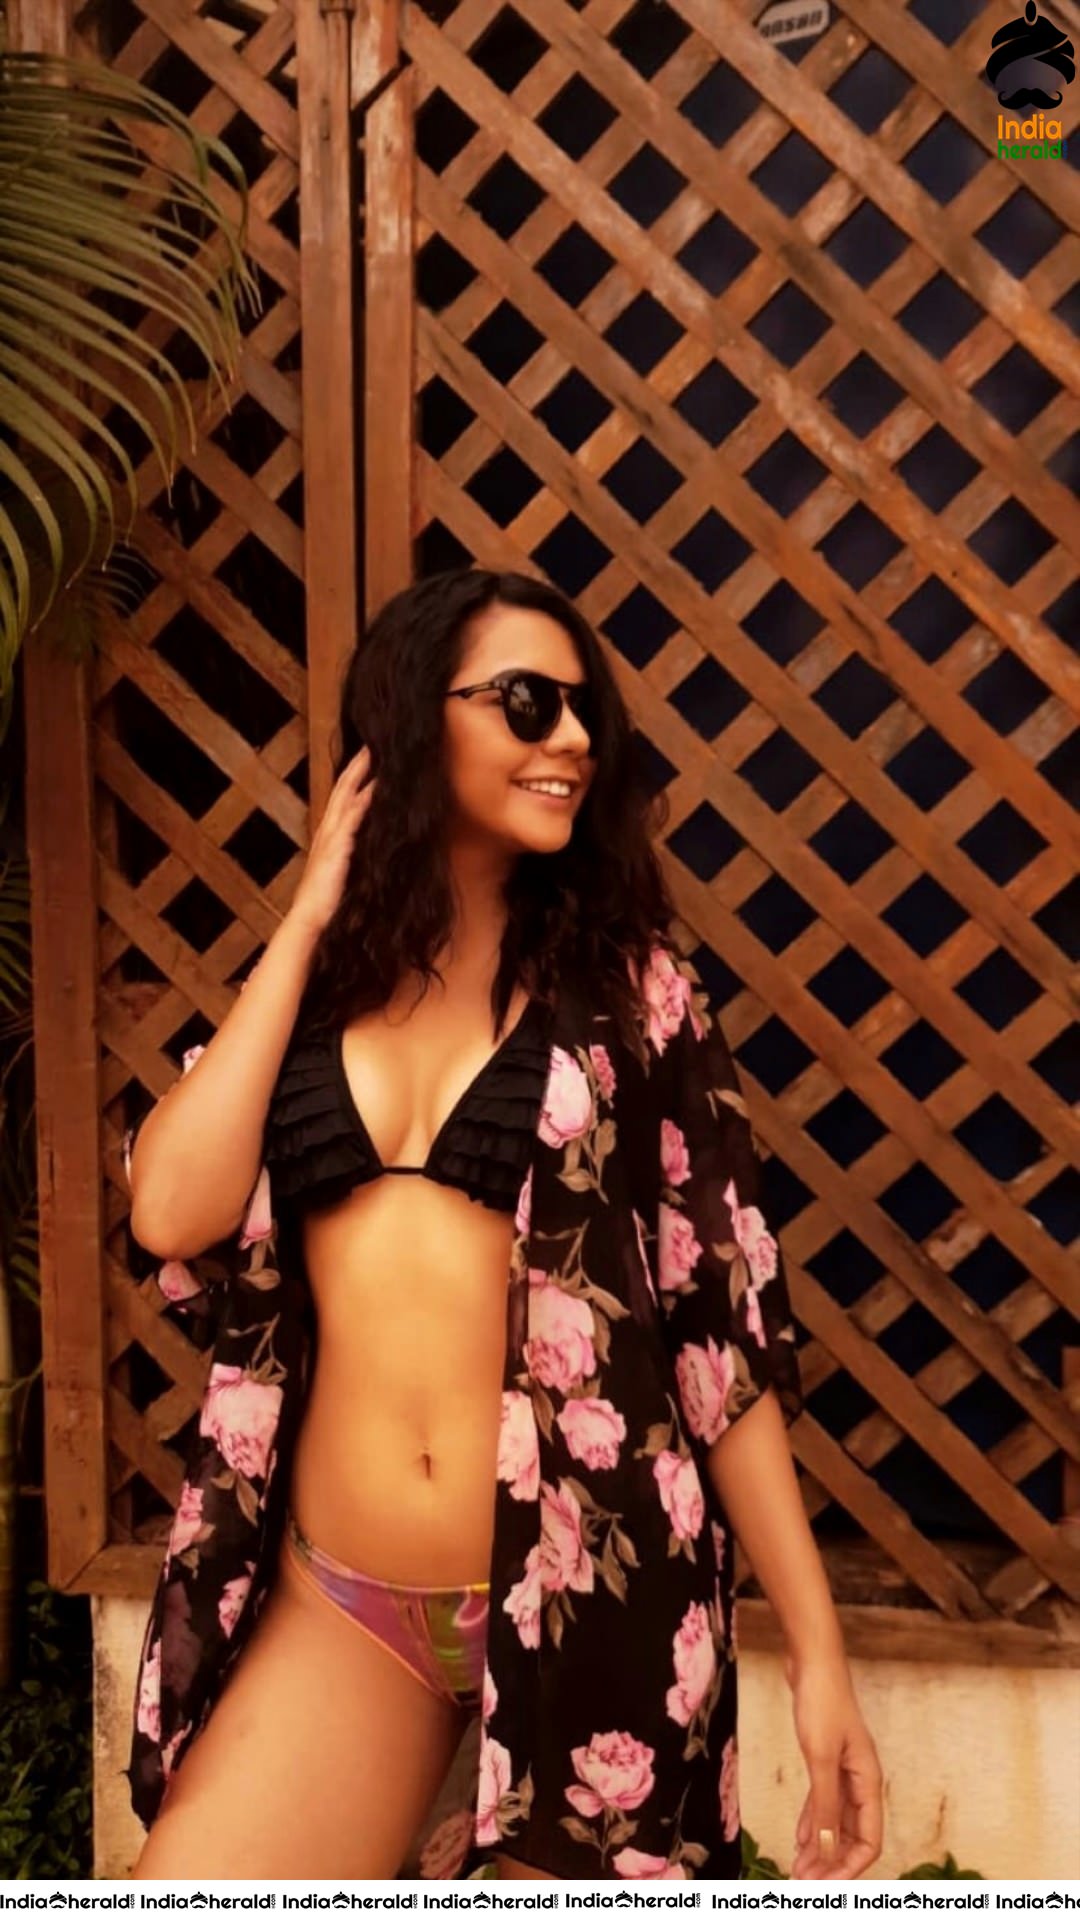 Ruhi Singh Hot Bikini Photos to give you an Instant Temptation on her lustful body